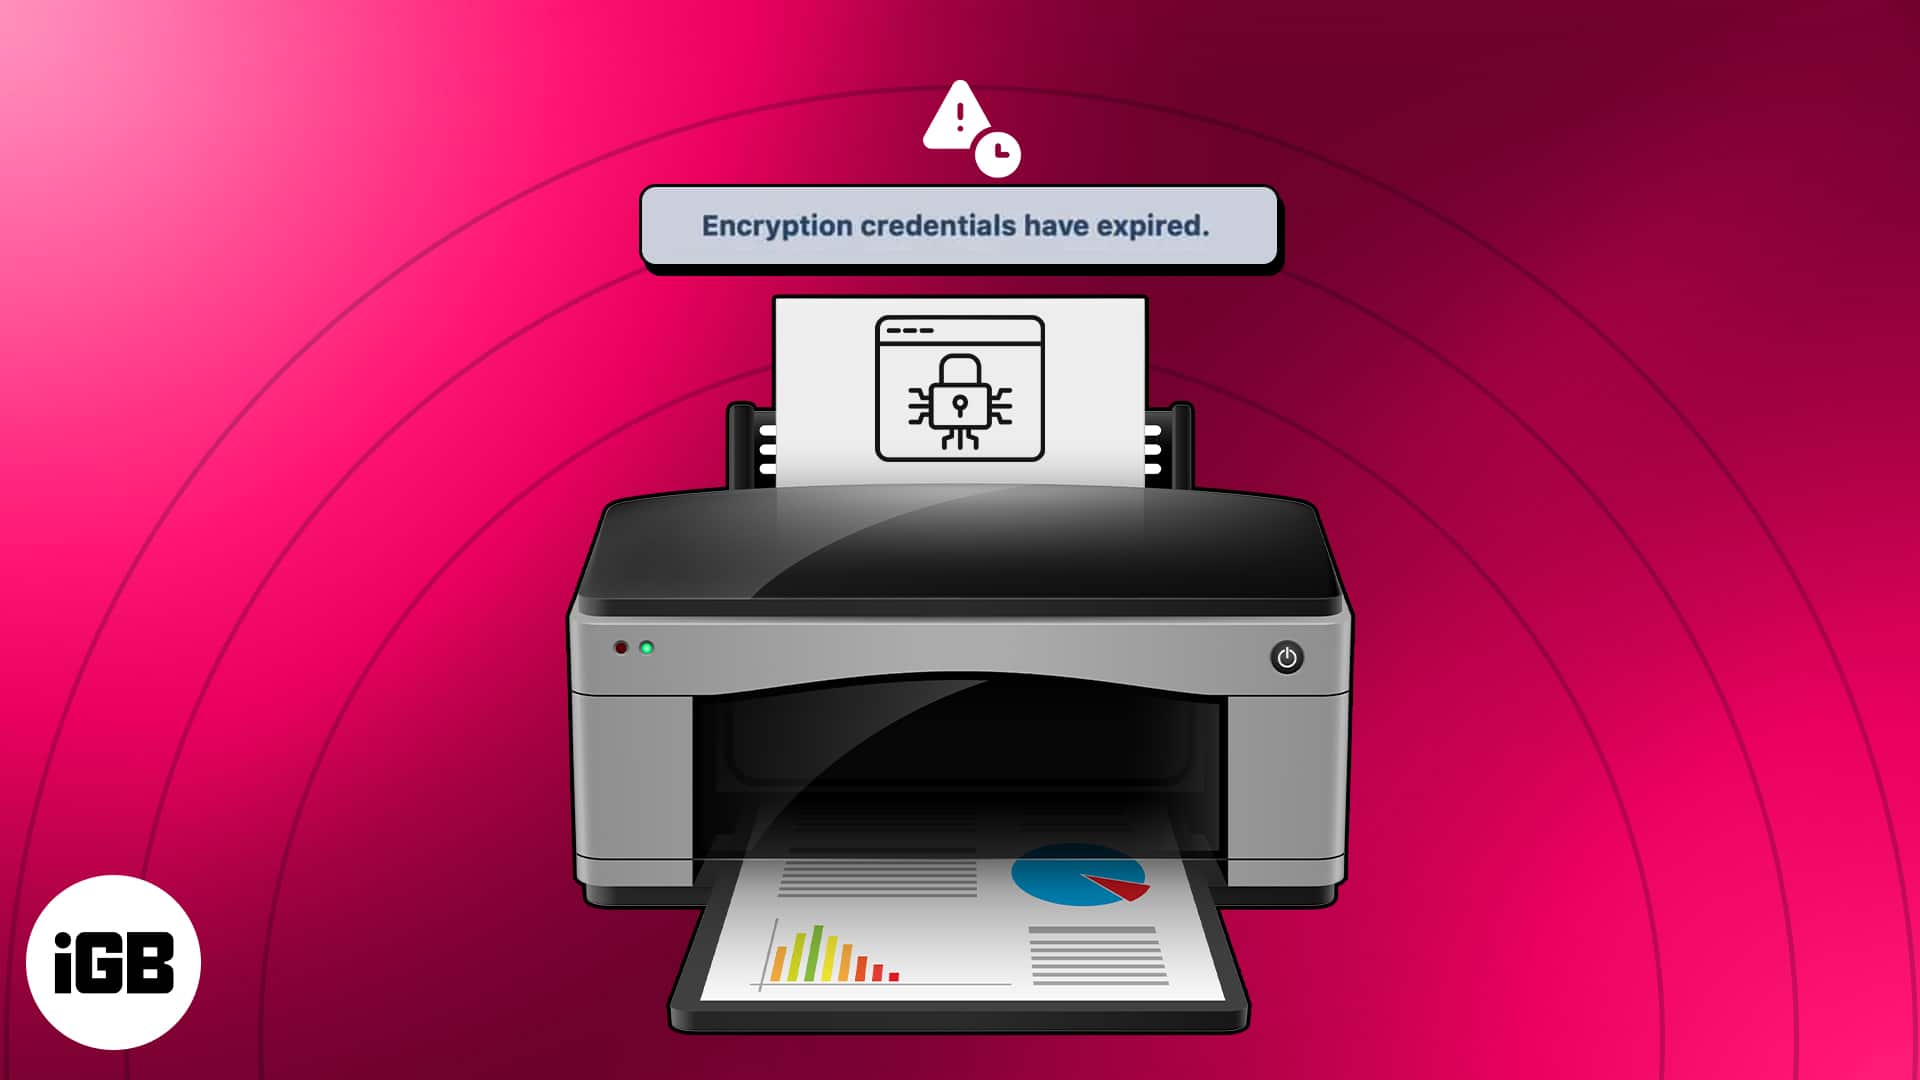 How to fix Printer Encryption credentials have expired on Mac